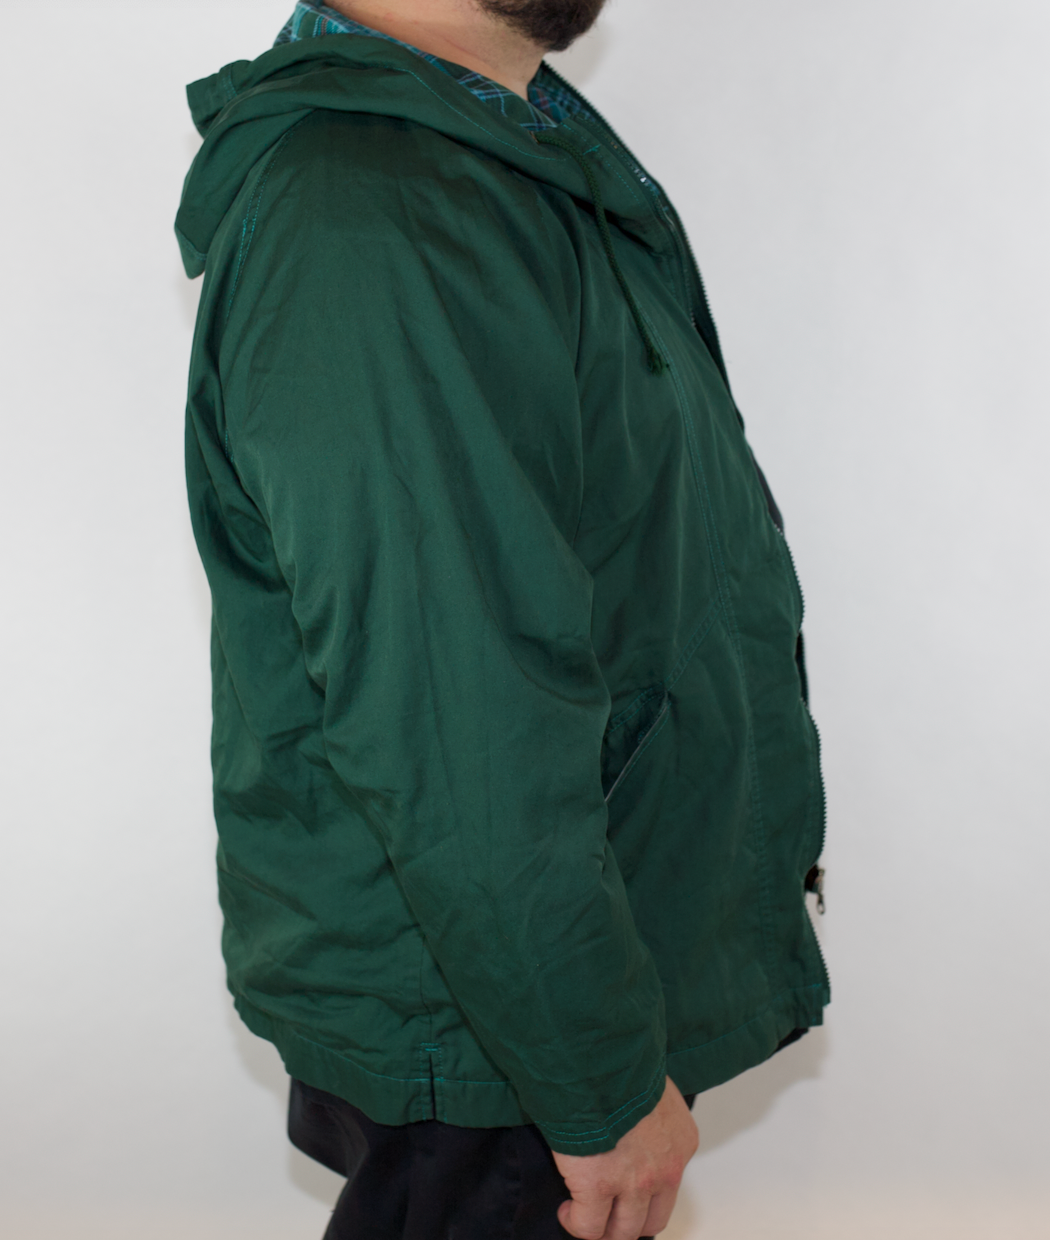 EXTREMELY RARE (SAMPLE) VINTAGE GREEN FRED PERRY SPRAY JACKET FITS (L)